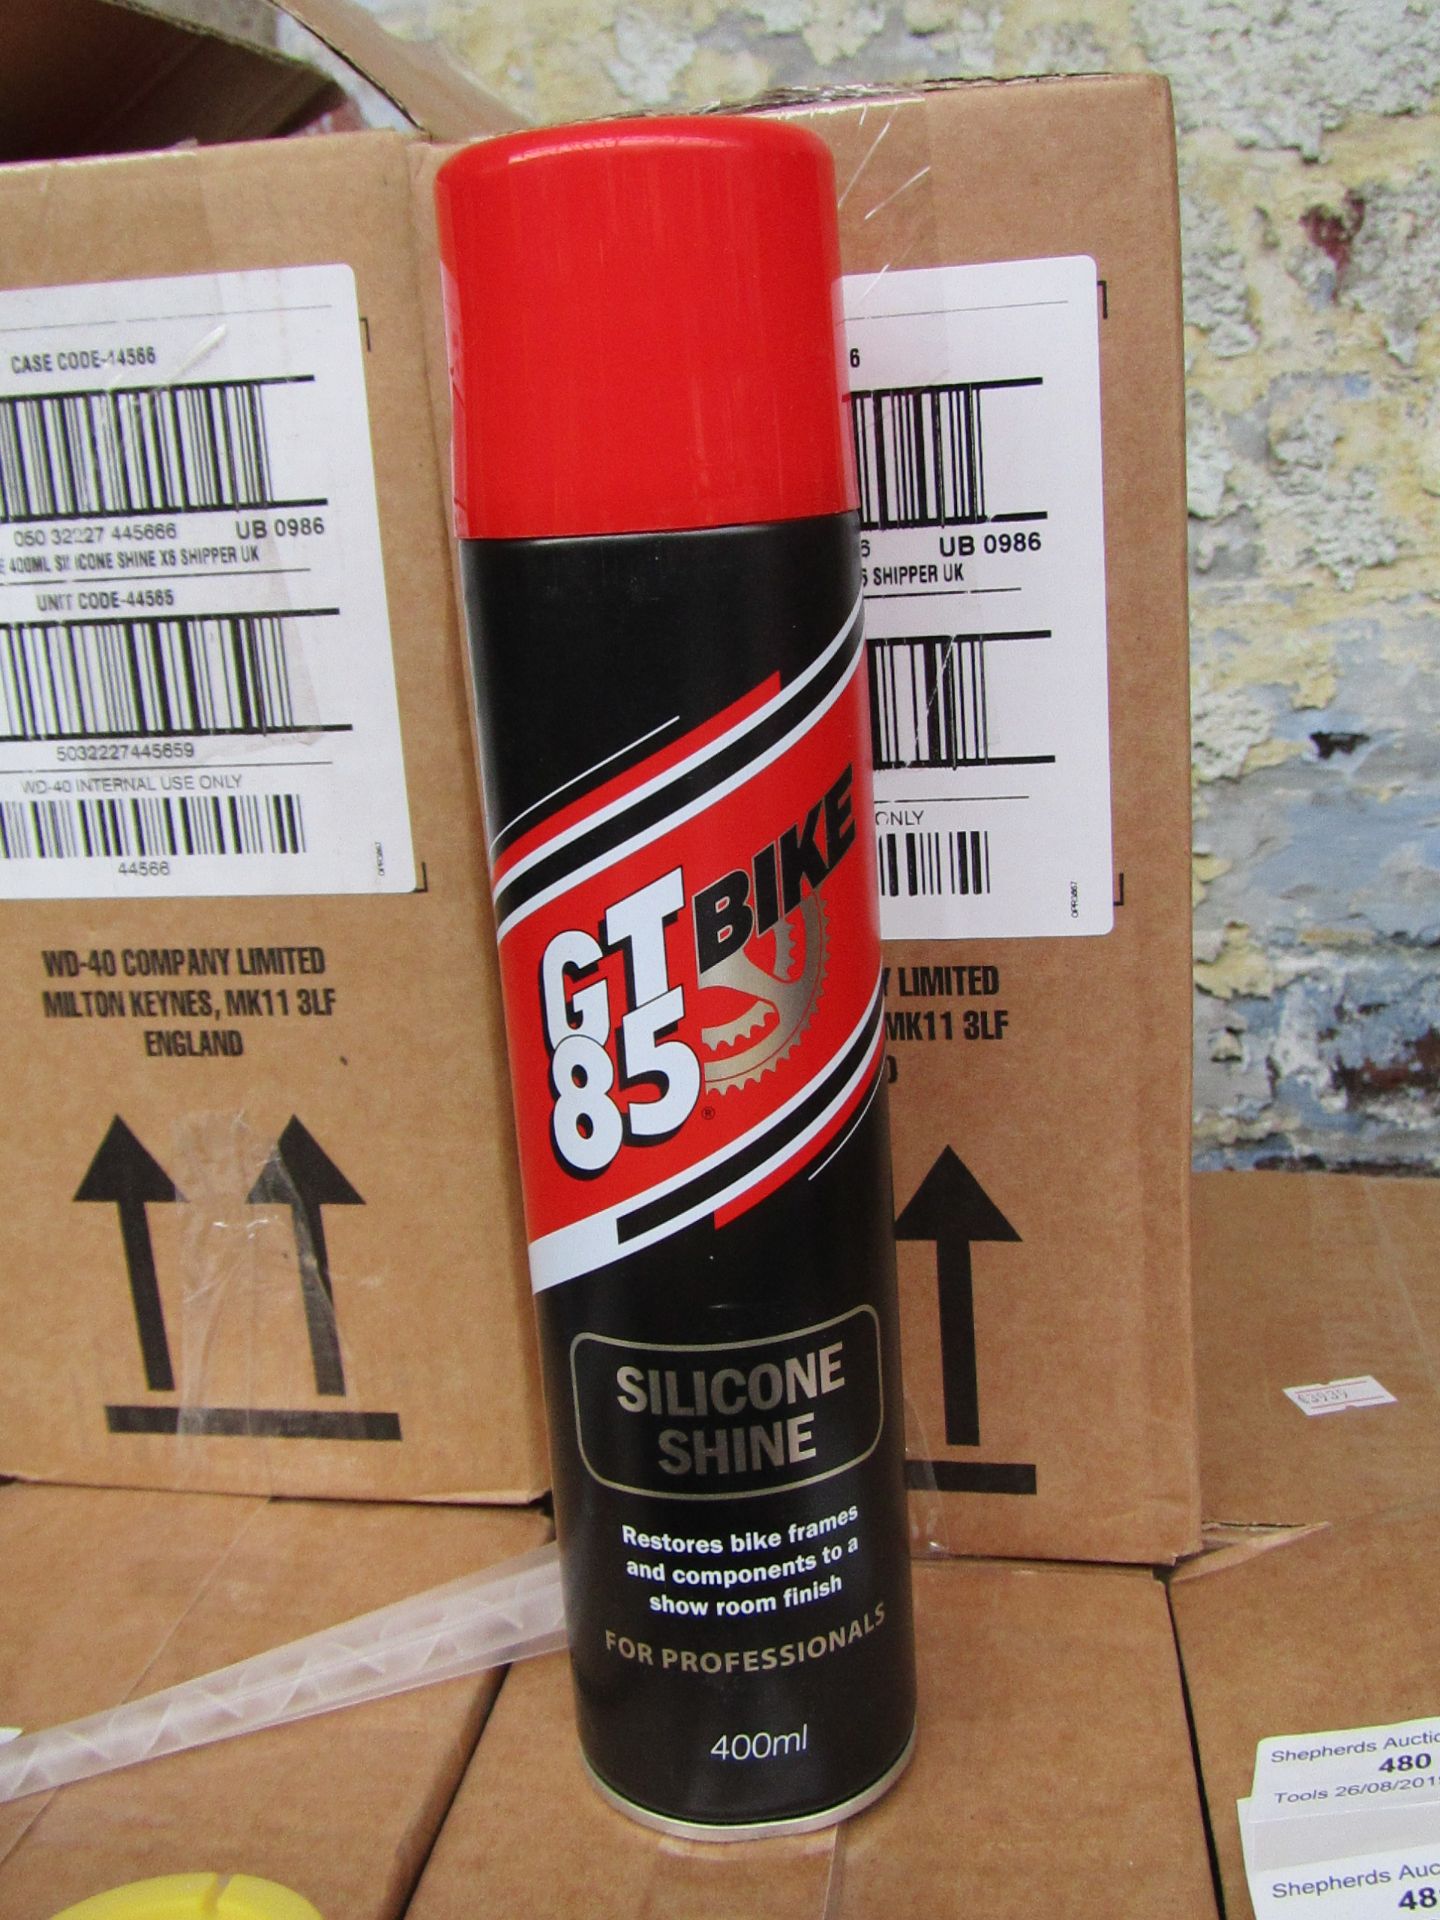 6x 400ml GT Bike 85 silicone shine RRP £6.99 each, all new and boxed.